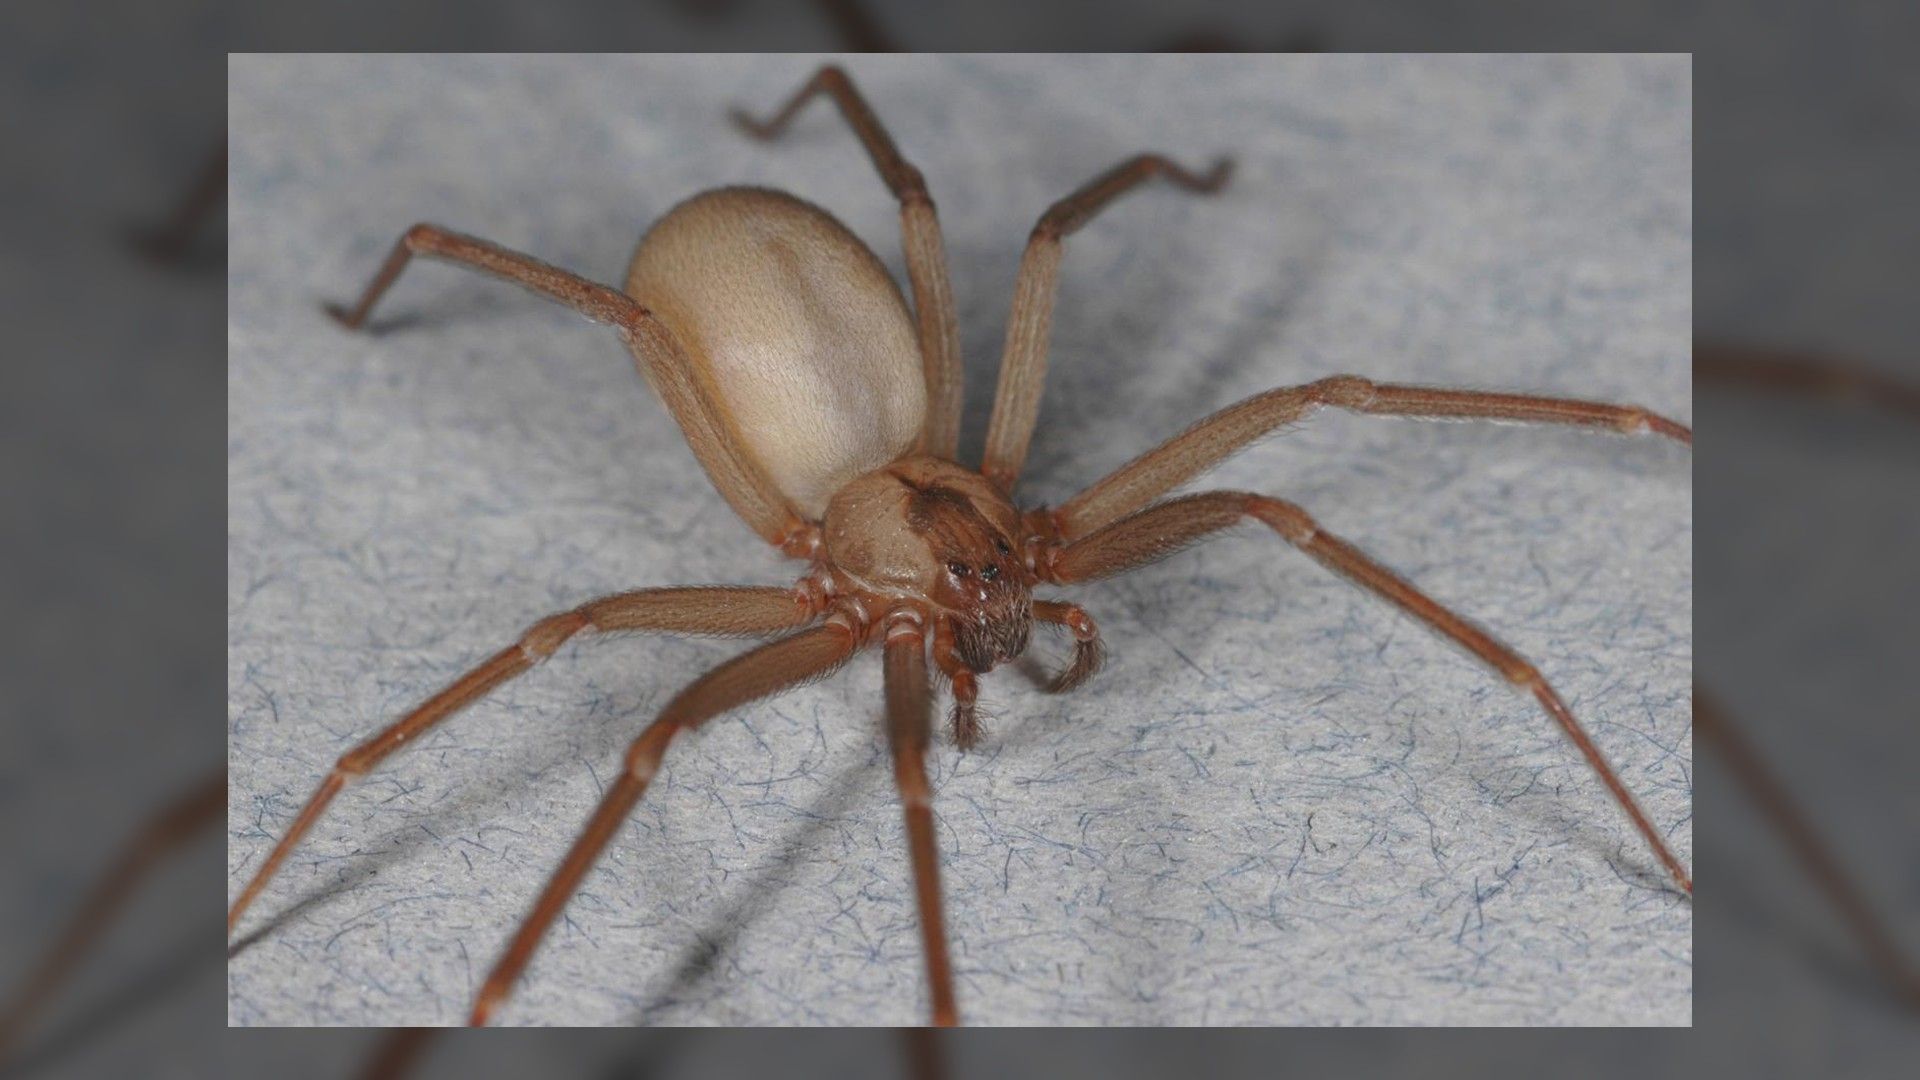 <p>                     As their name suggests, brown recluse spiders (<em>Loxosceles reclusa</em>) have a shy nature and tend to hide away in dark, sheltered places. However, the brown recluse spider will bite if they feel threatened, and their bites can be deadly. They are usually found in the south and central United States, spanning southeastern Nebraska to southwestern Ohio, south to northwestern Georgia and into Texas.                   </p>                                      <p>                     The brown recluse spider can be dangerous to people because their venom contains a toxin that can cause skin necrosis (rotting). For the most part, symptoms, such as burning and itching at the bite site, as well as fever and nausea, develop a few hours after a bite. In extreme cases, the venom can lead to serious reactions or even death, especially to more vulnerable groups such as young children and the elderly.                   </p>